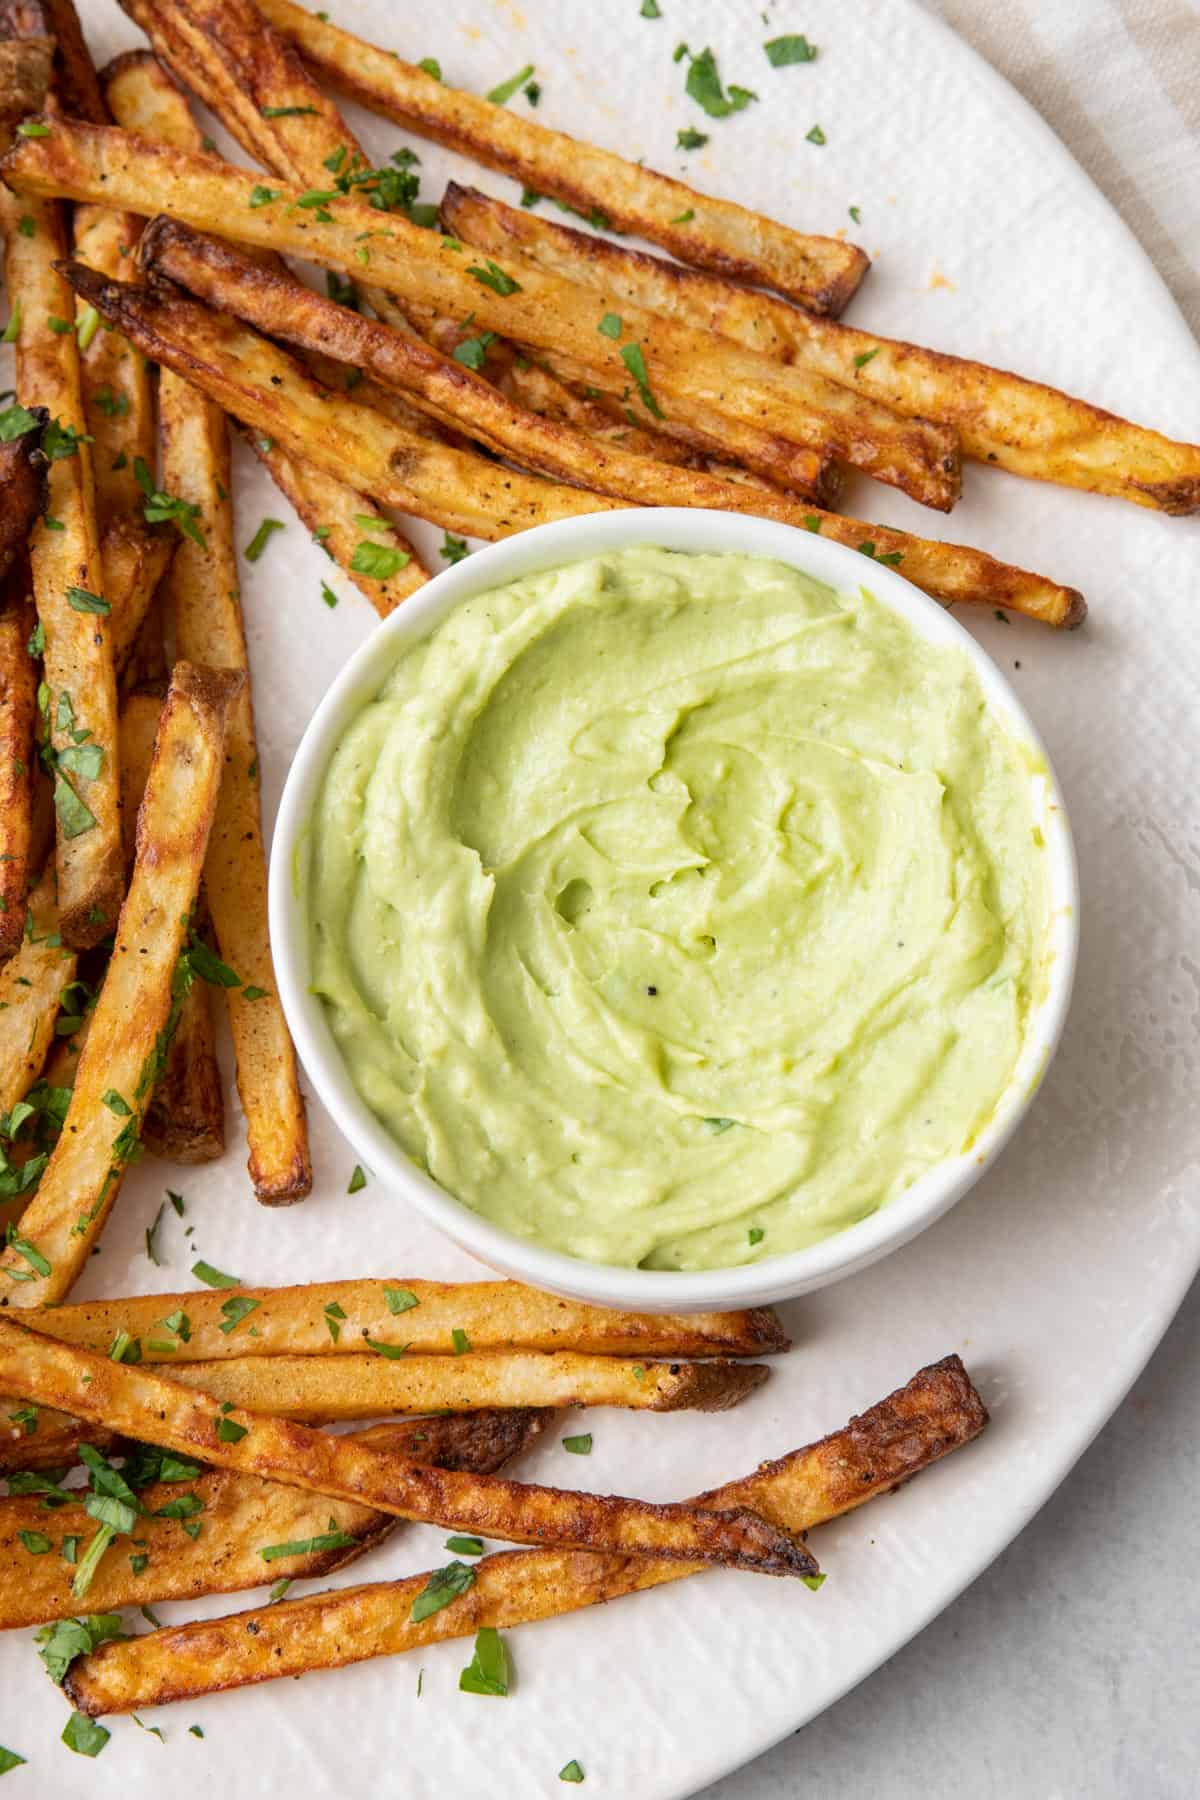 Avocado crema in a small dish on a plate with crispy fries.